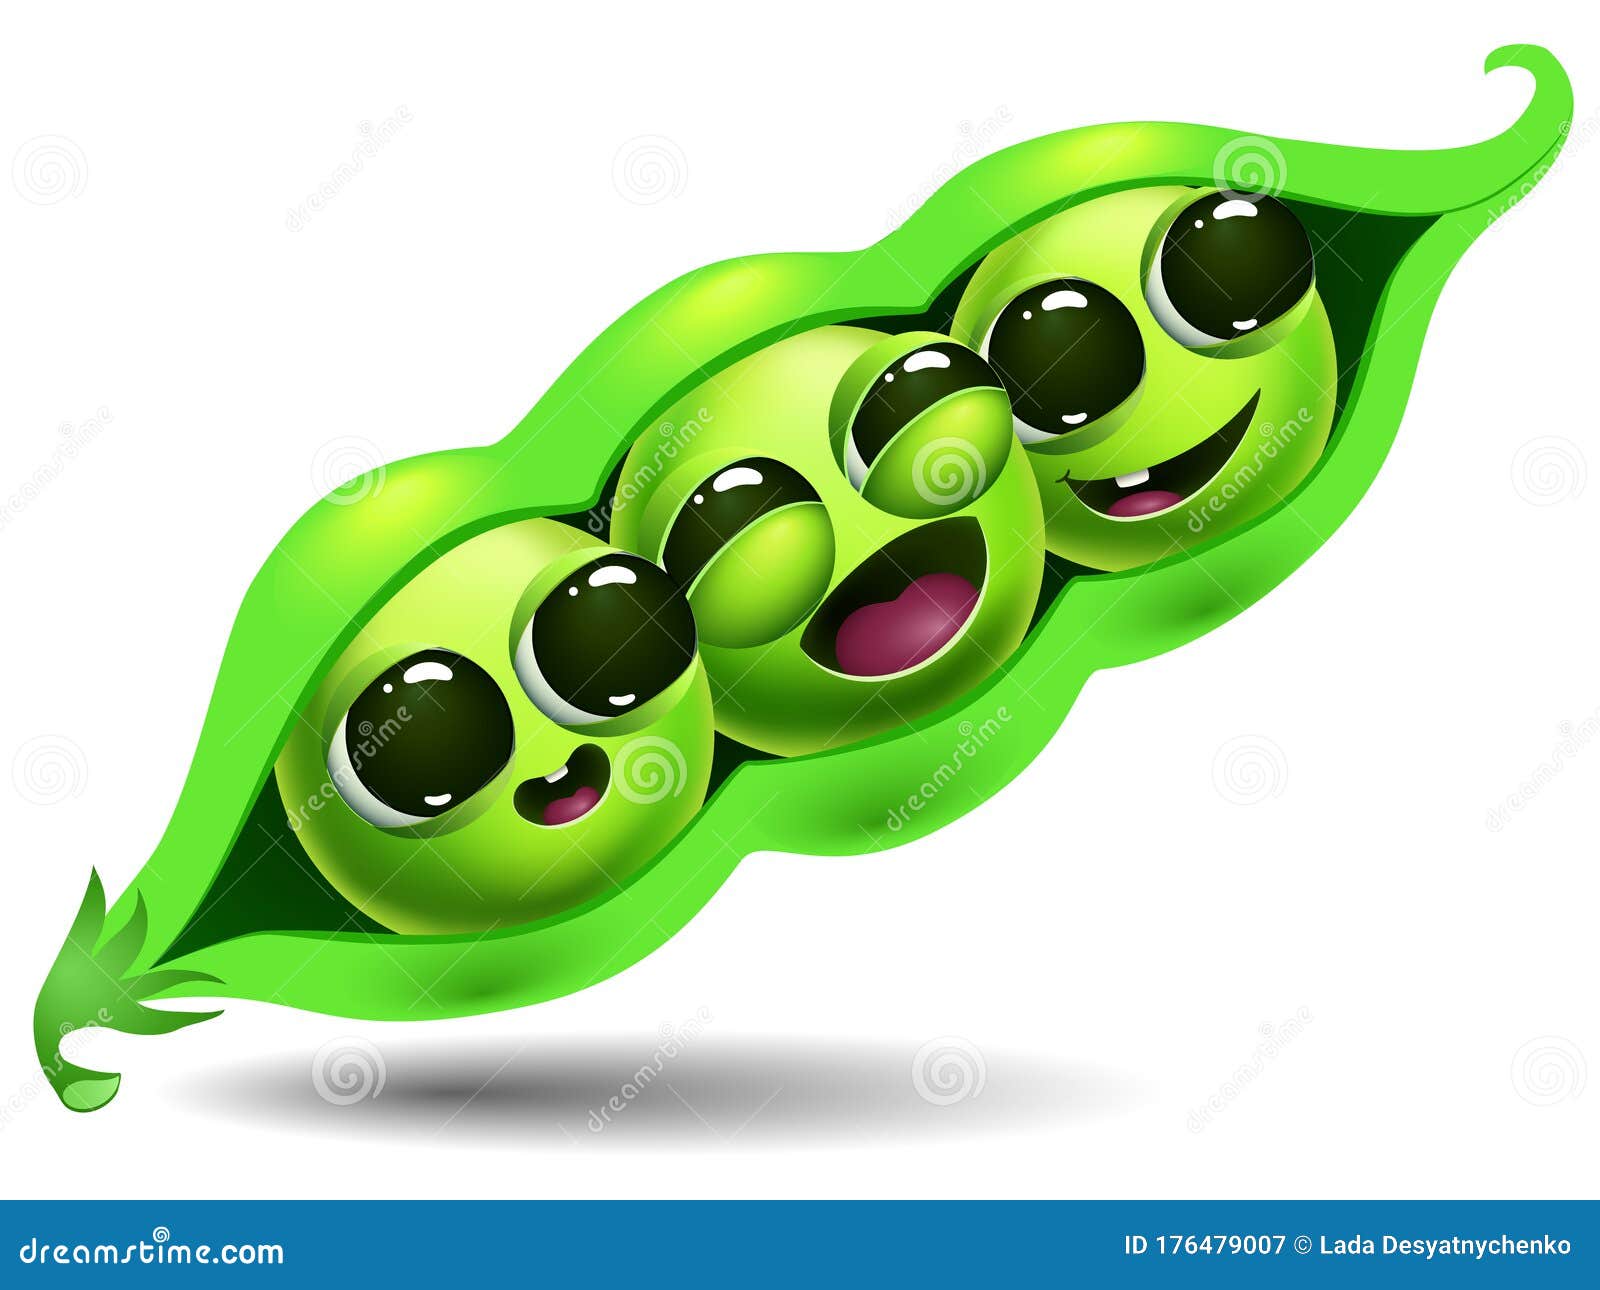 Funny Cartoon Pea Pod on White Background Stock Vector - Illustration of  isolated, green: 176479007